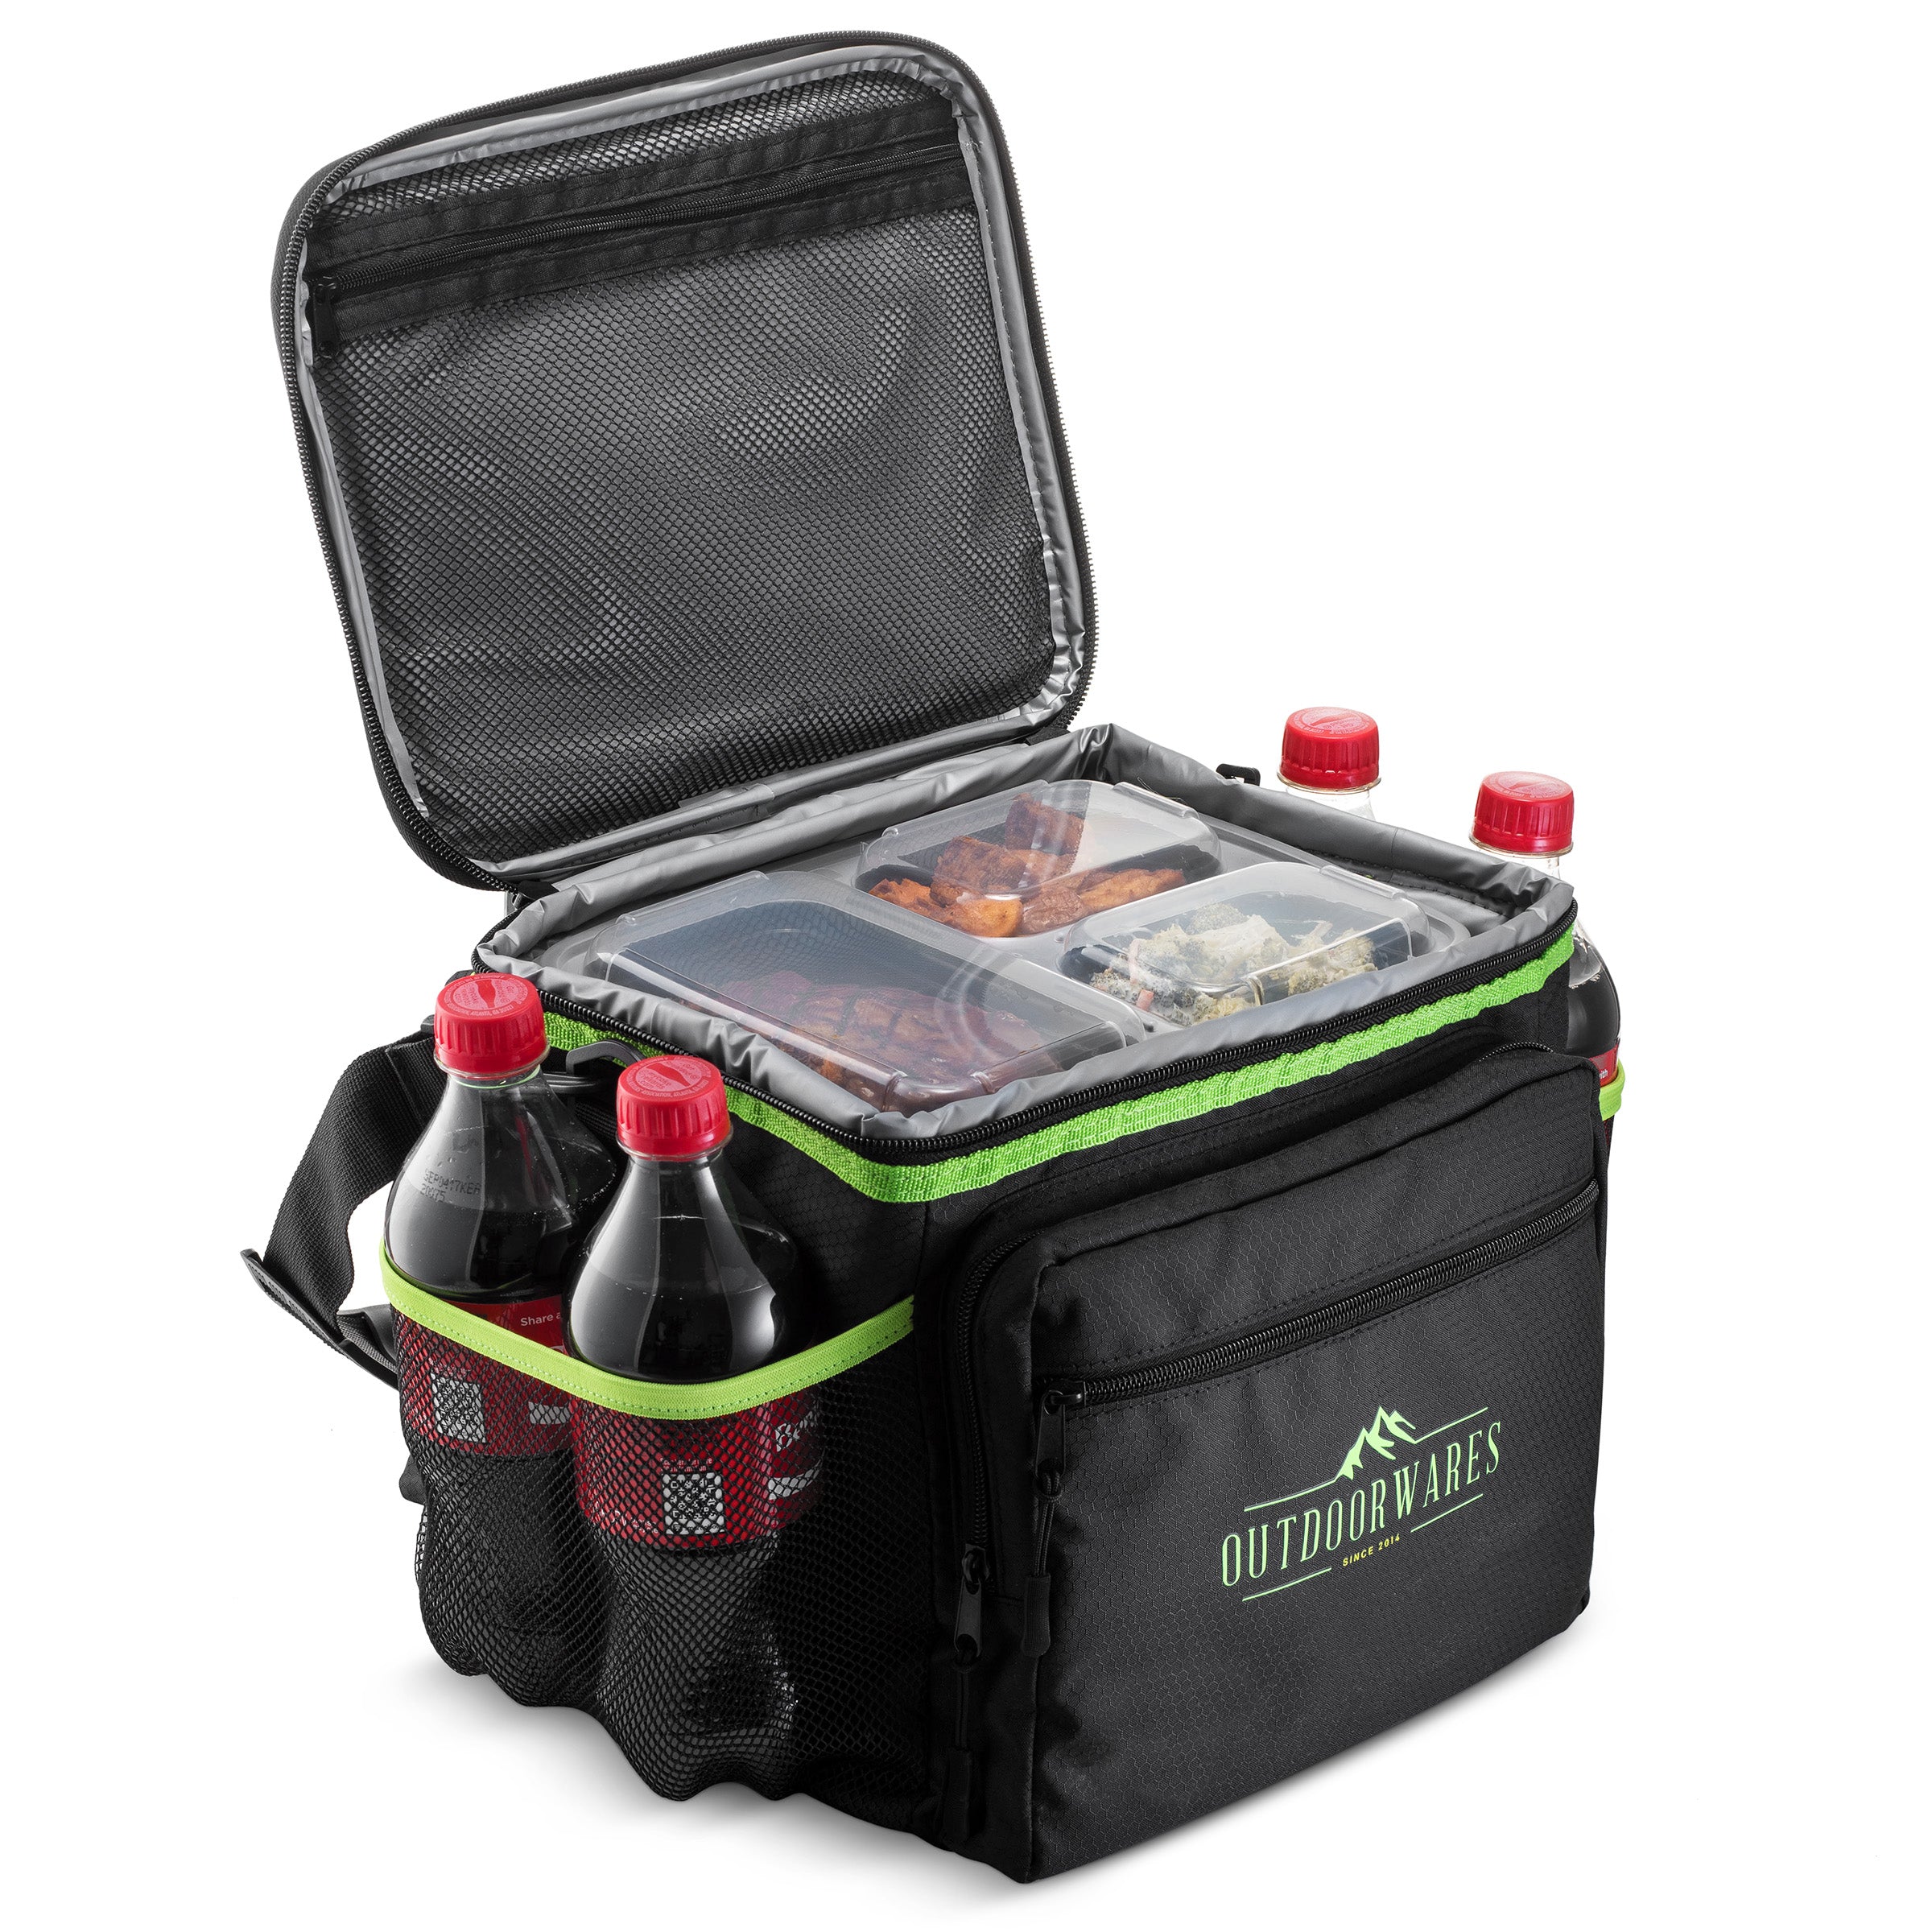 Cooler lunch Bag box - Insulated By Outdoorwares Large Capacity Durable, To  Keep Foods And Drinks In The Right Temperature - Good For Travel, Picnic